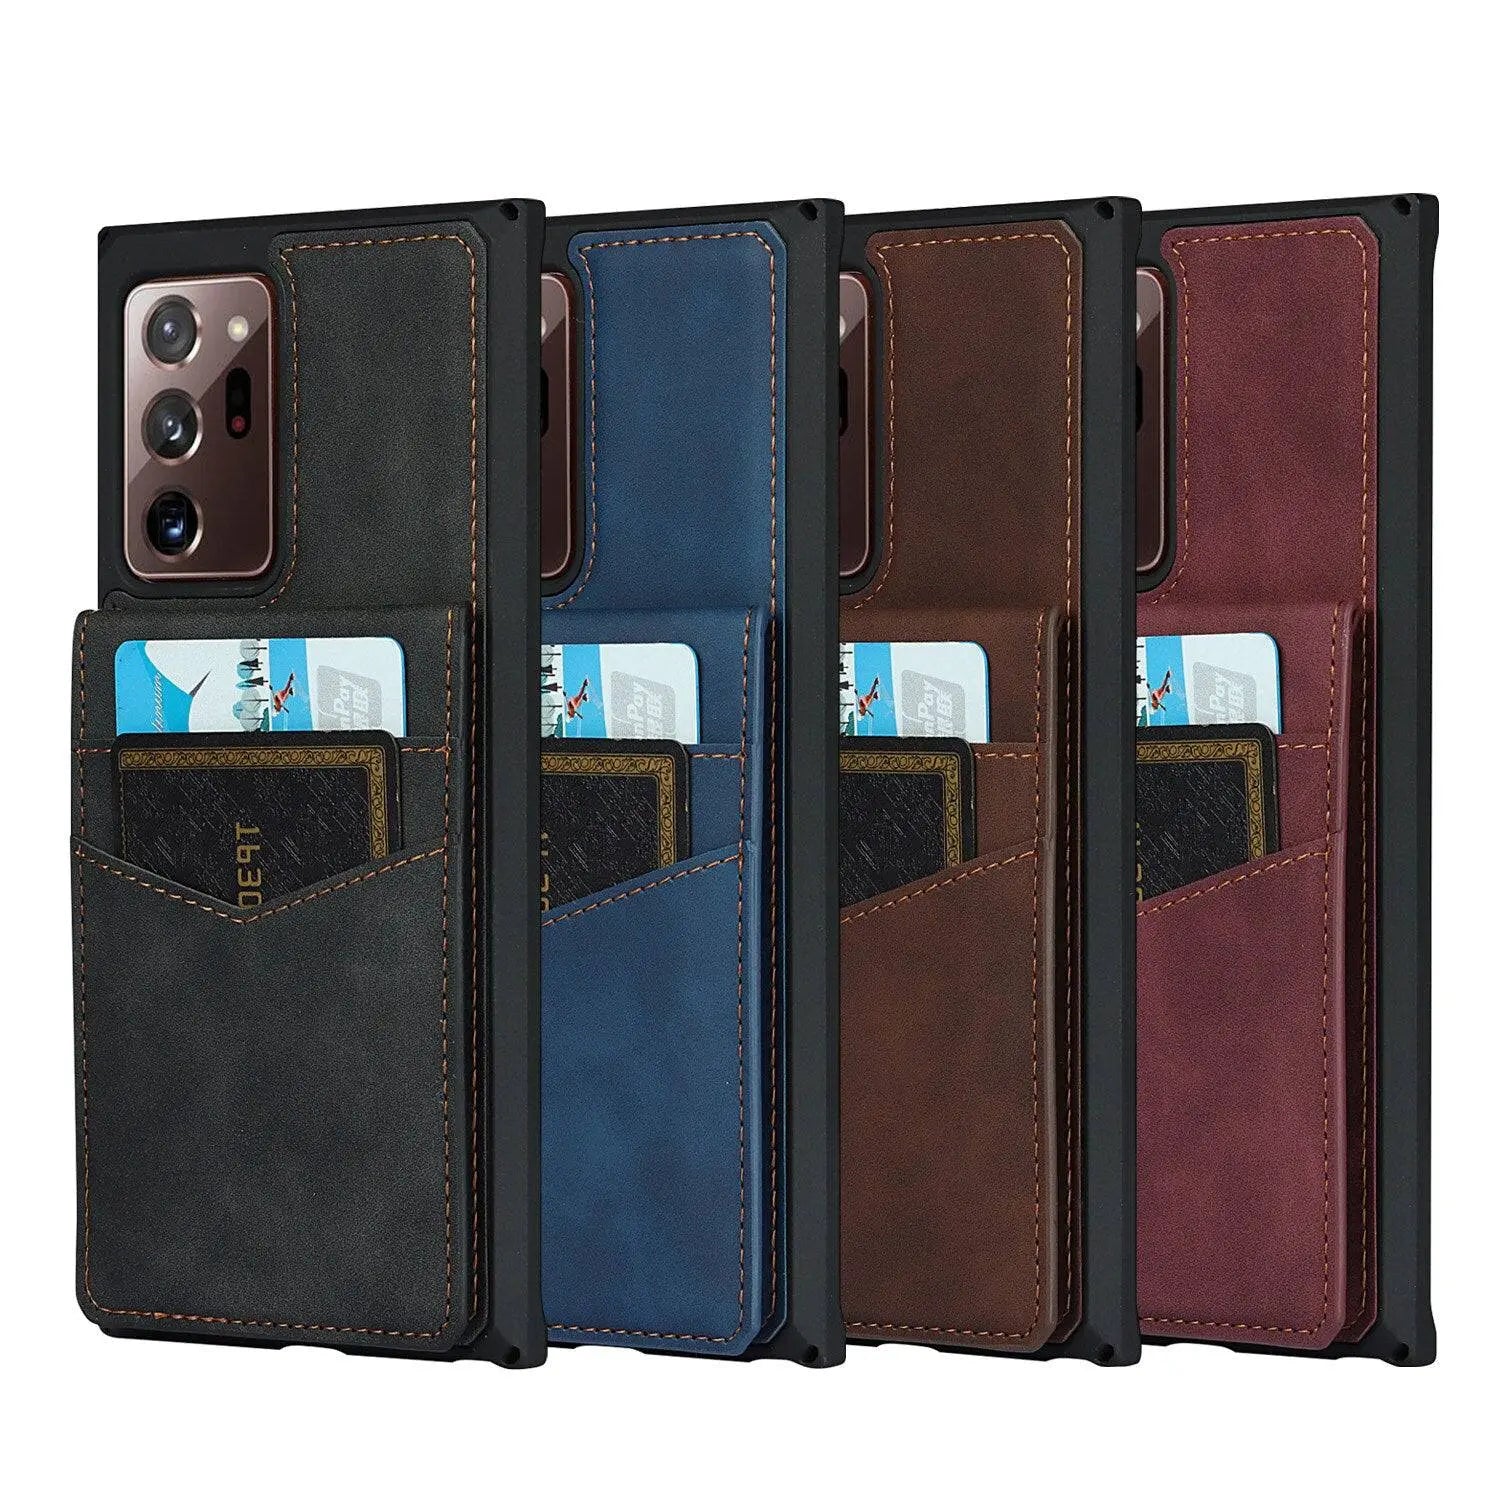 Pristine Leather Flip Case For Samsung Galaxy Phone - Pinnacle Luxuries